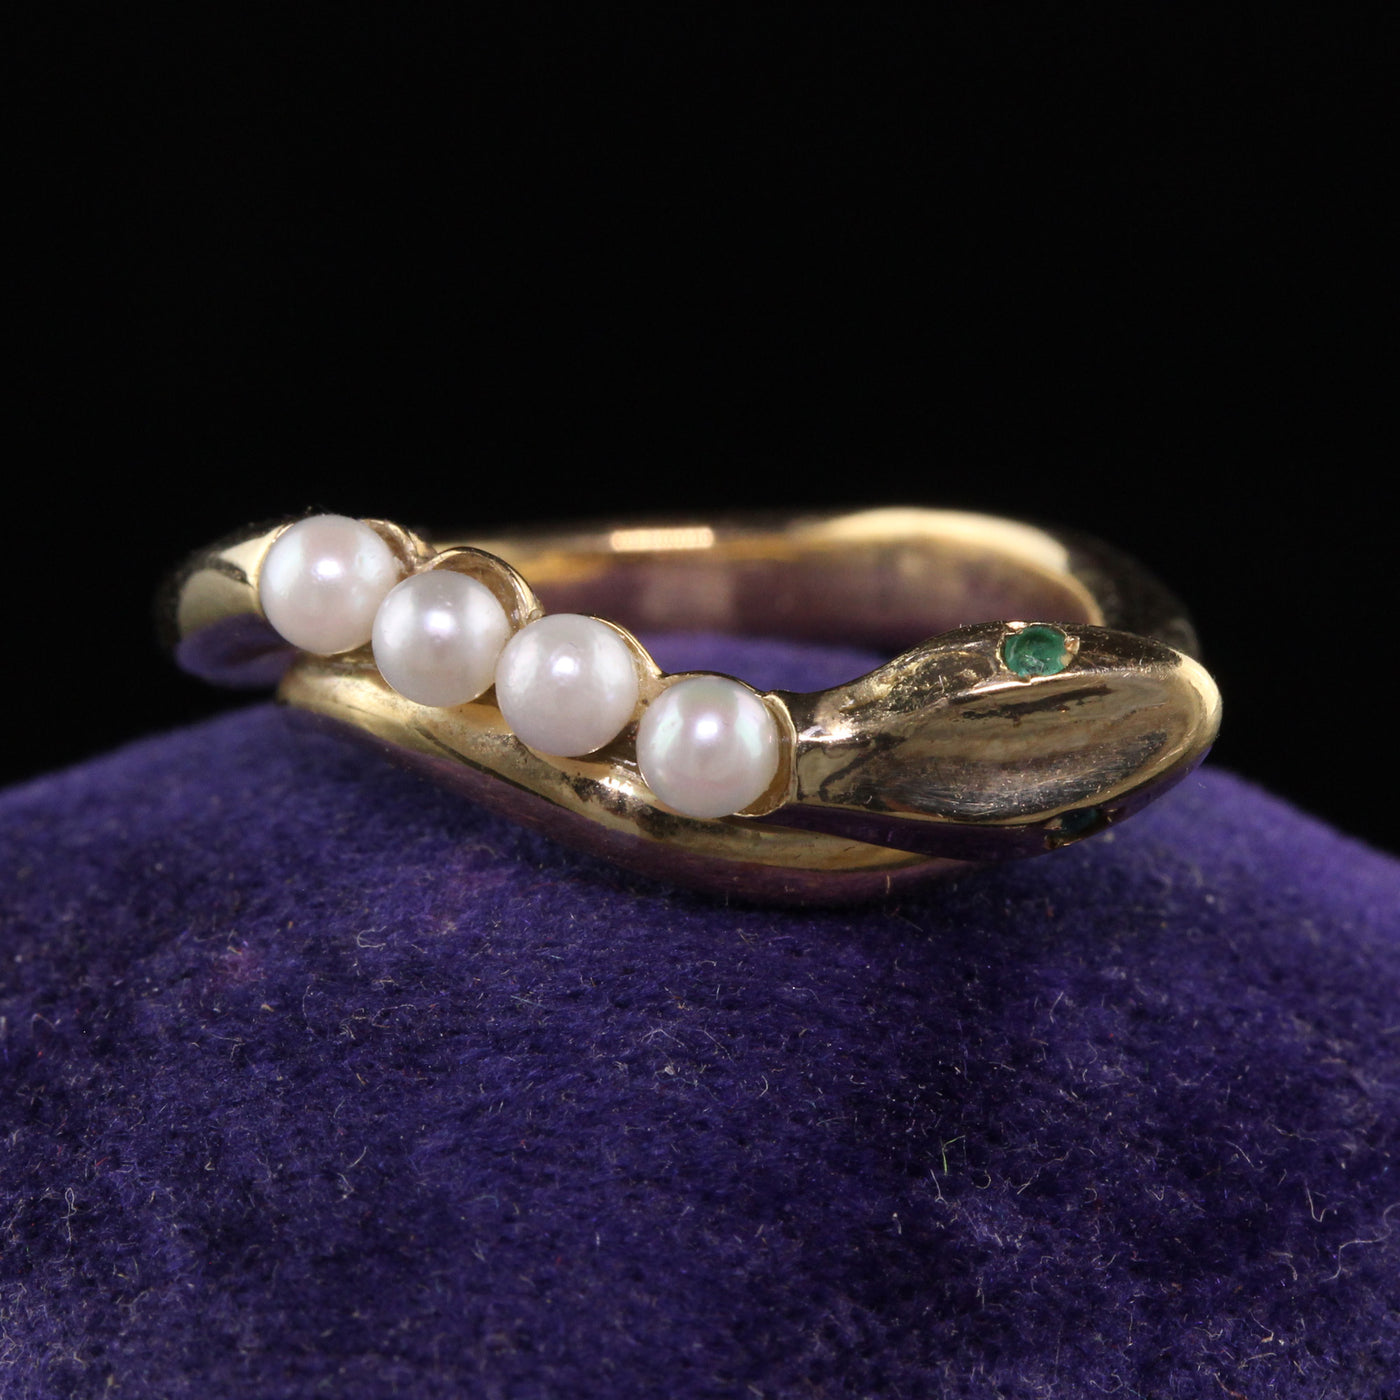 Retro Estate 14K Yellow Gold Pearl and Emerald Snake Ring